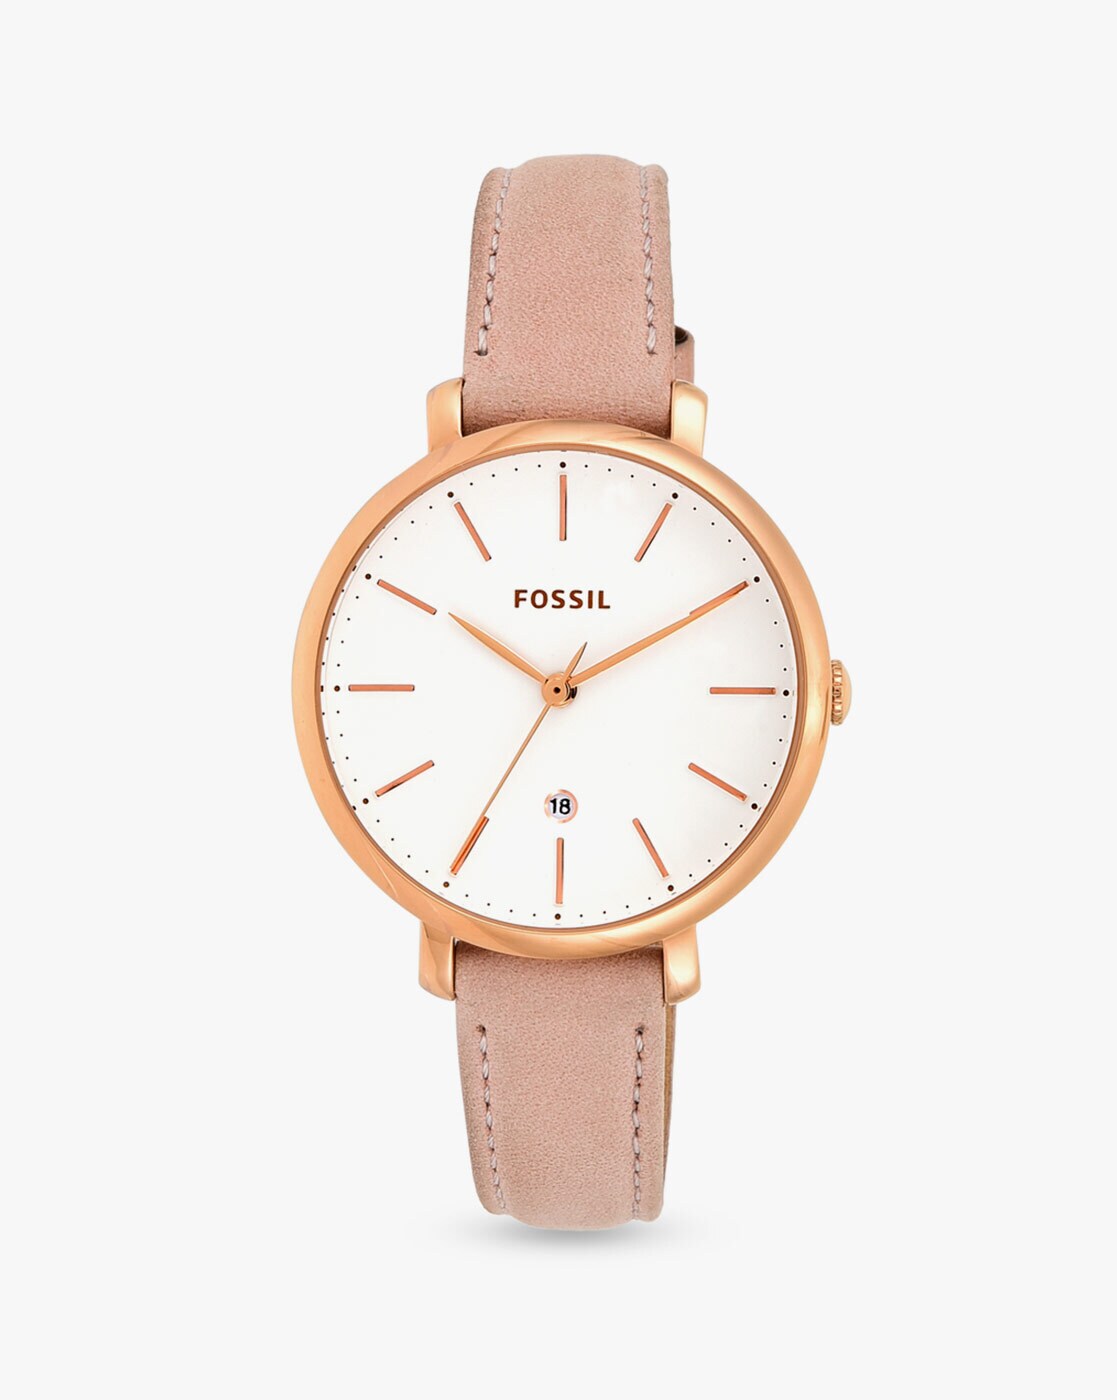 Sale > fossil pink watch > is stock